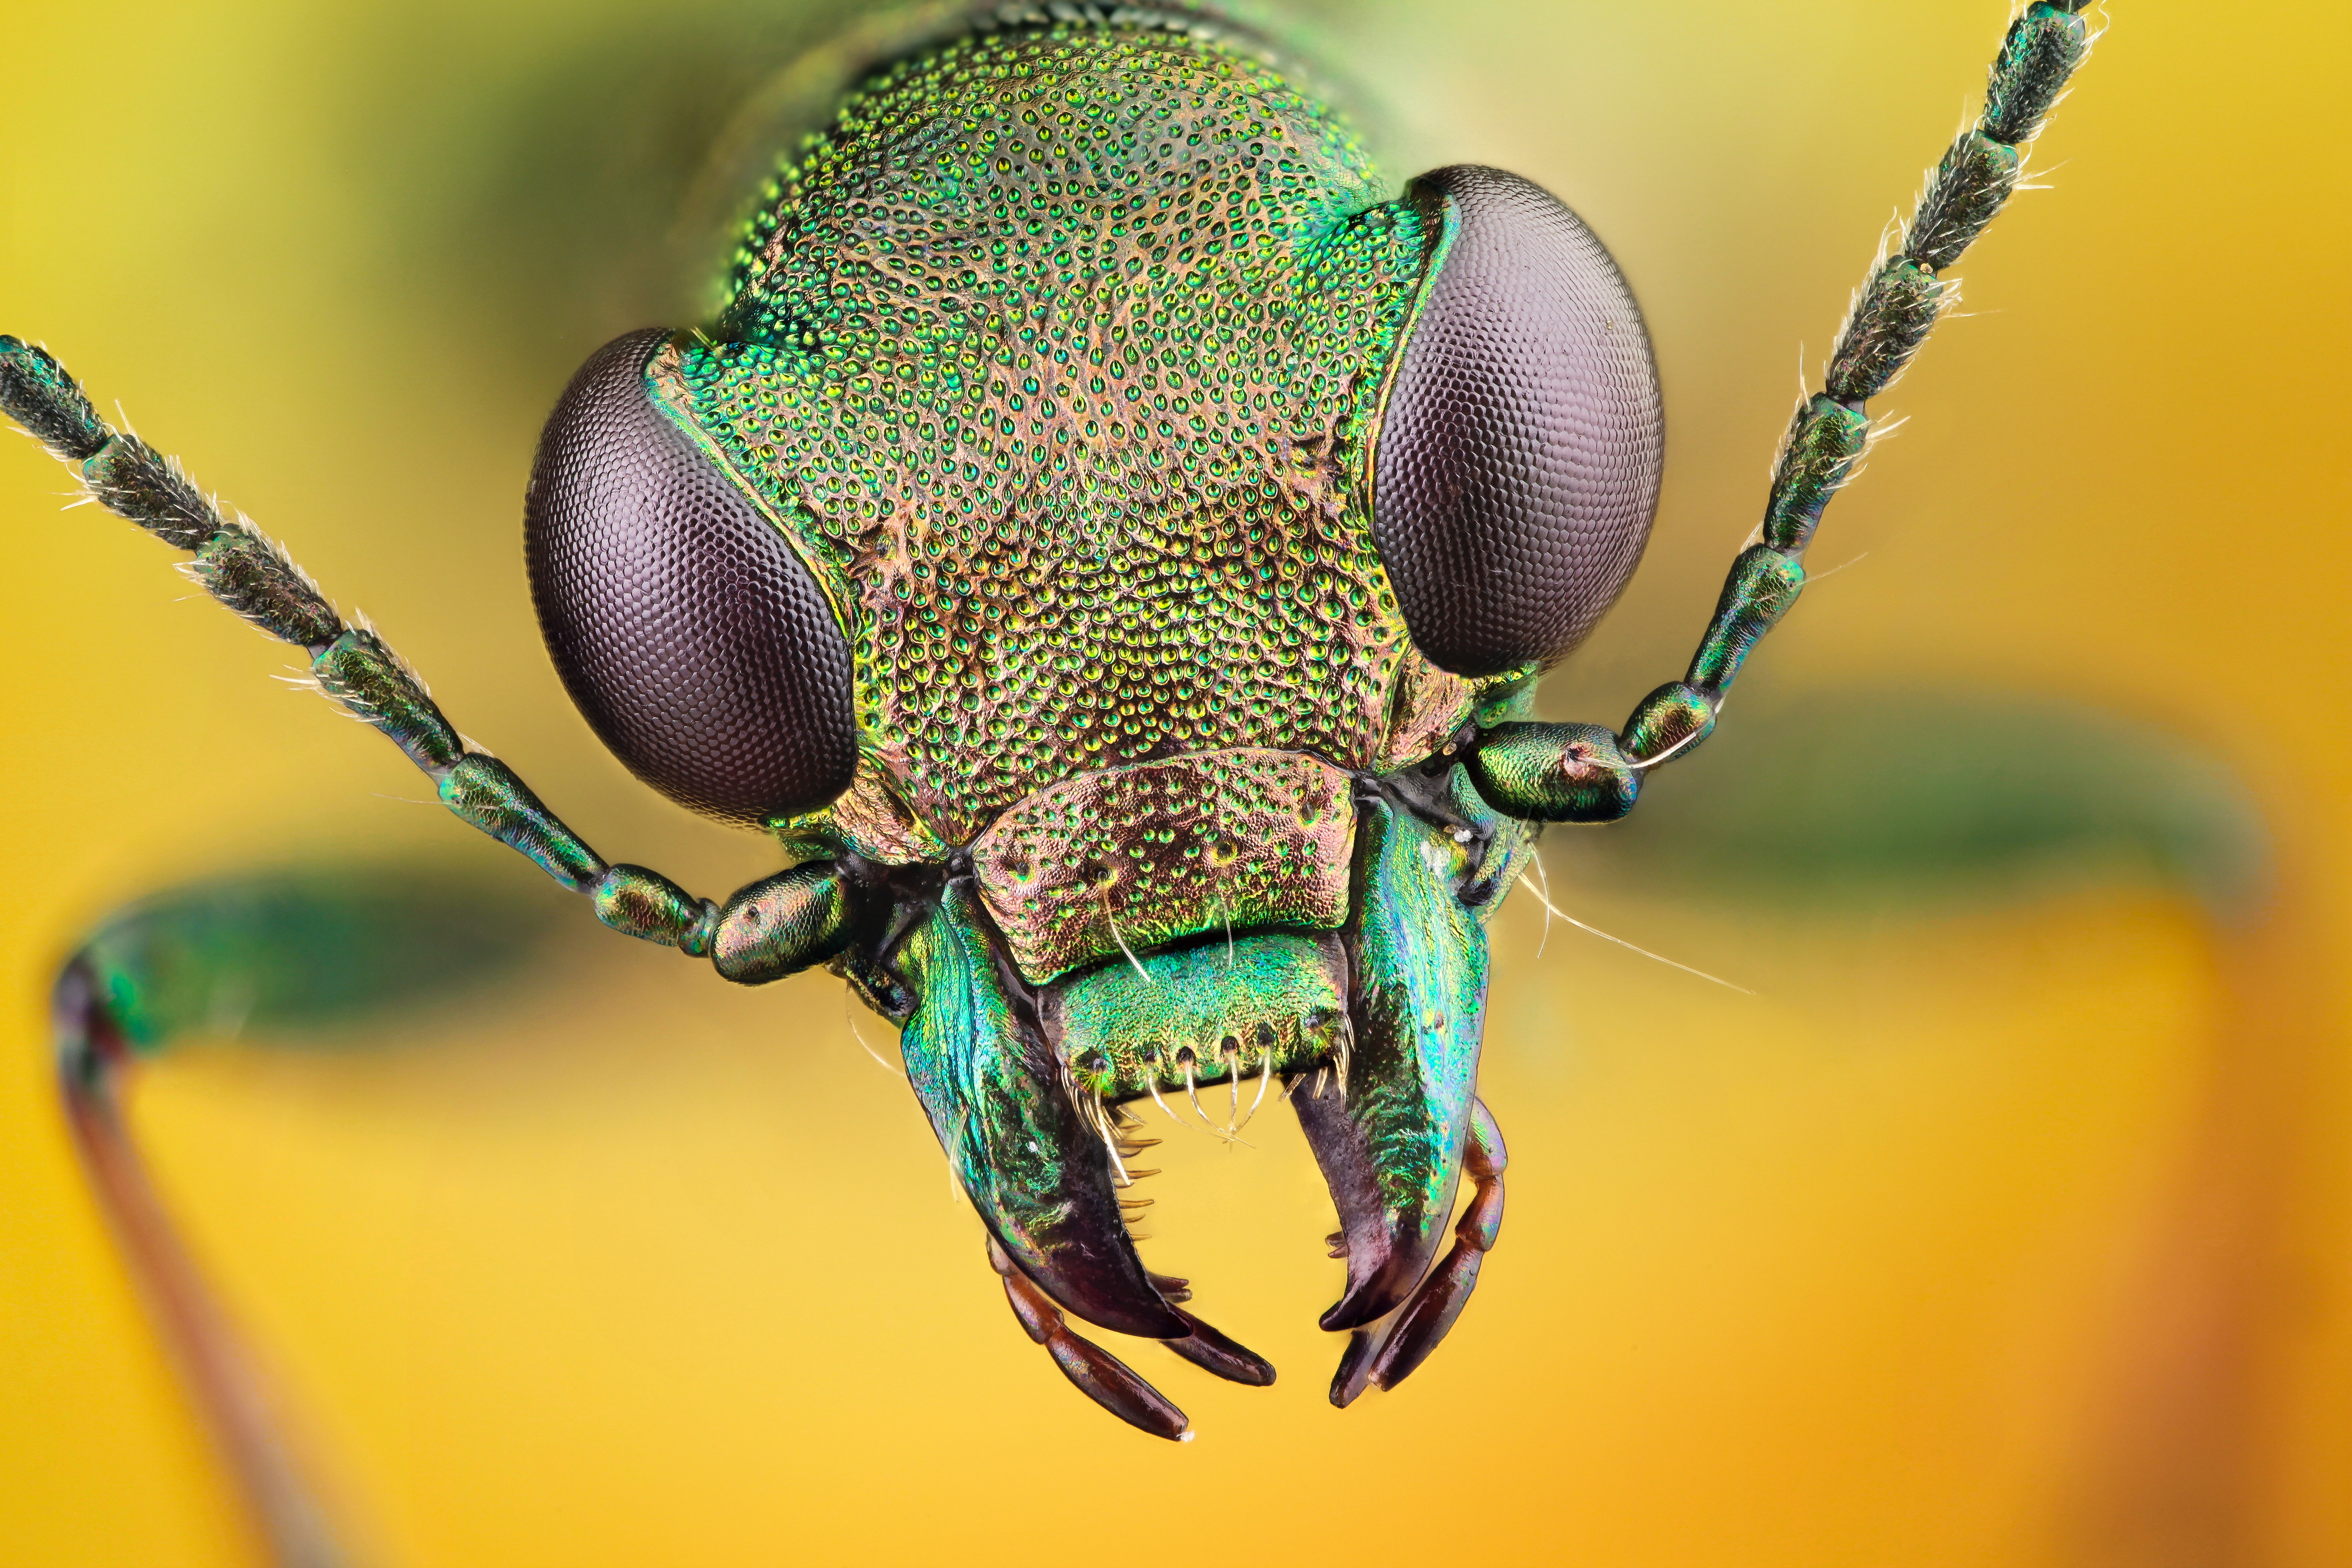 Animal Insect 4k Ultra HD Wallpaper